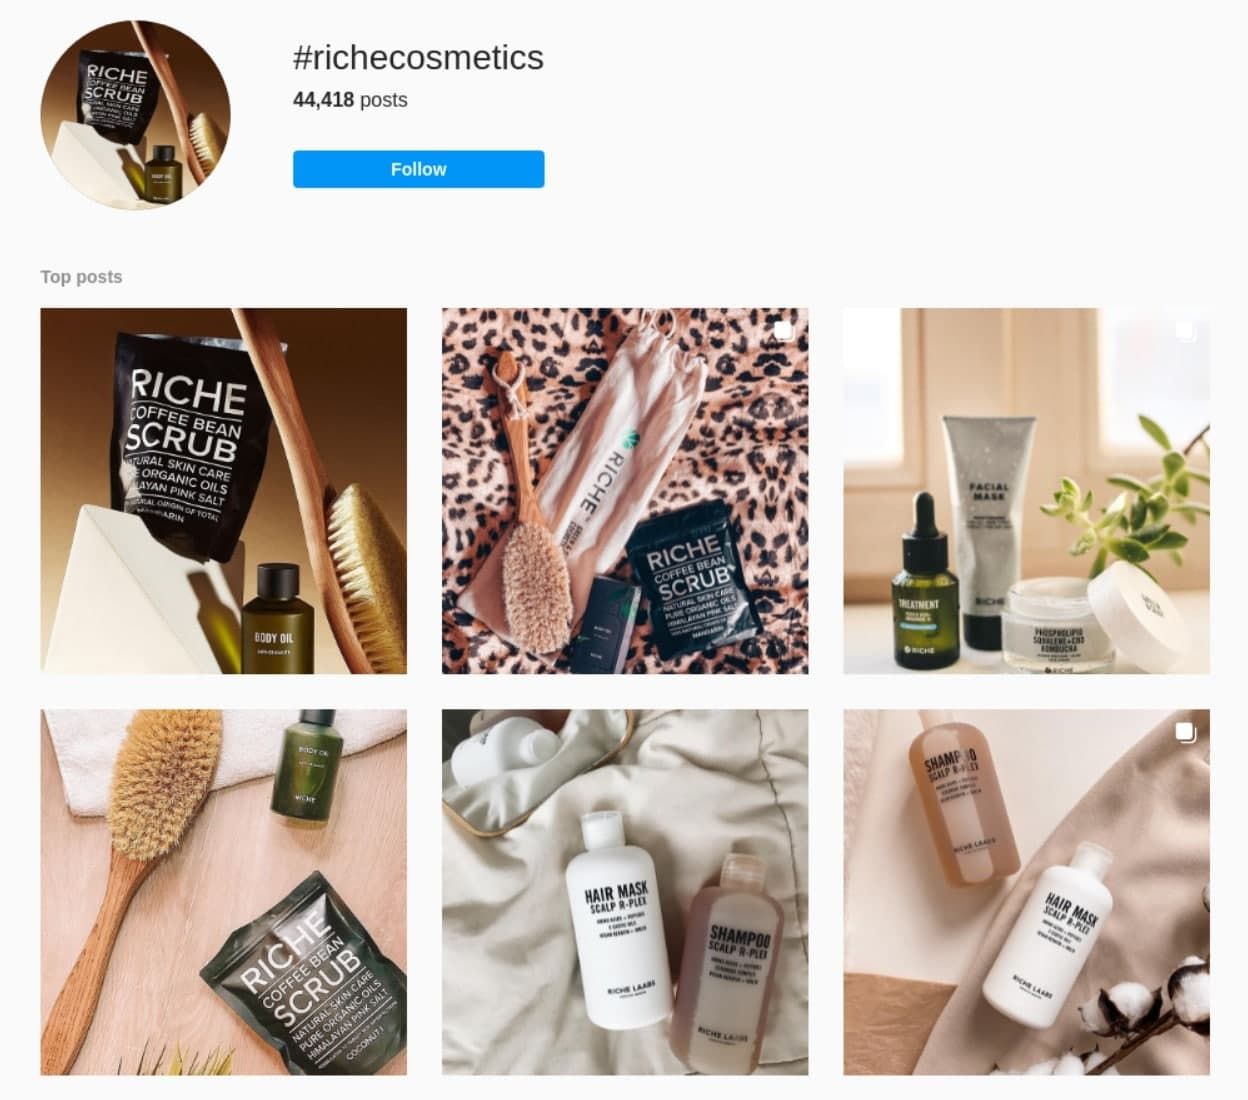 Advertising campaign of the brand on Instagram